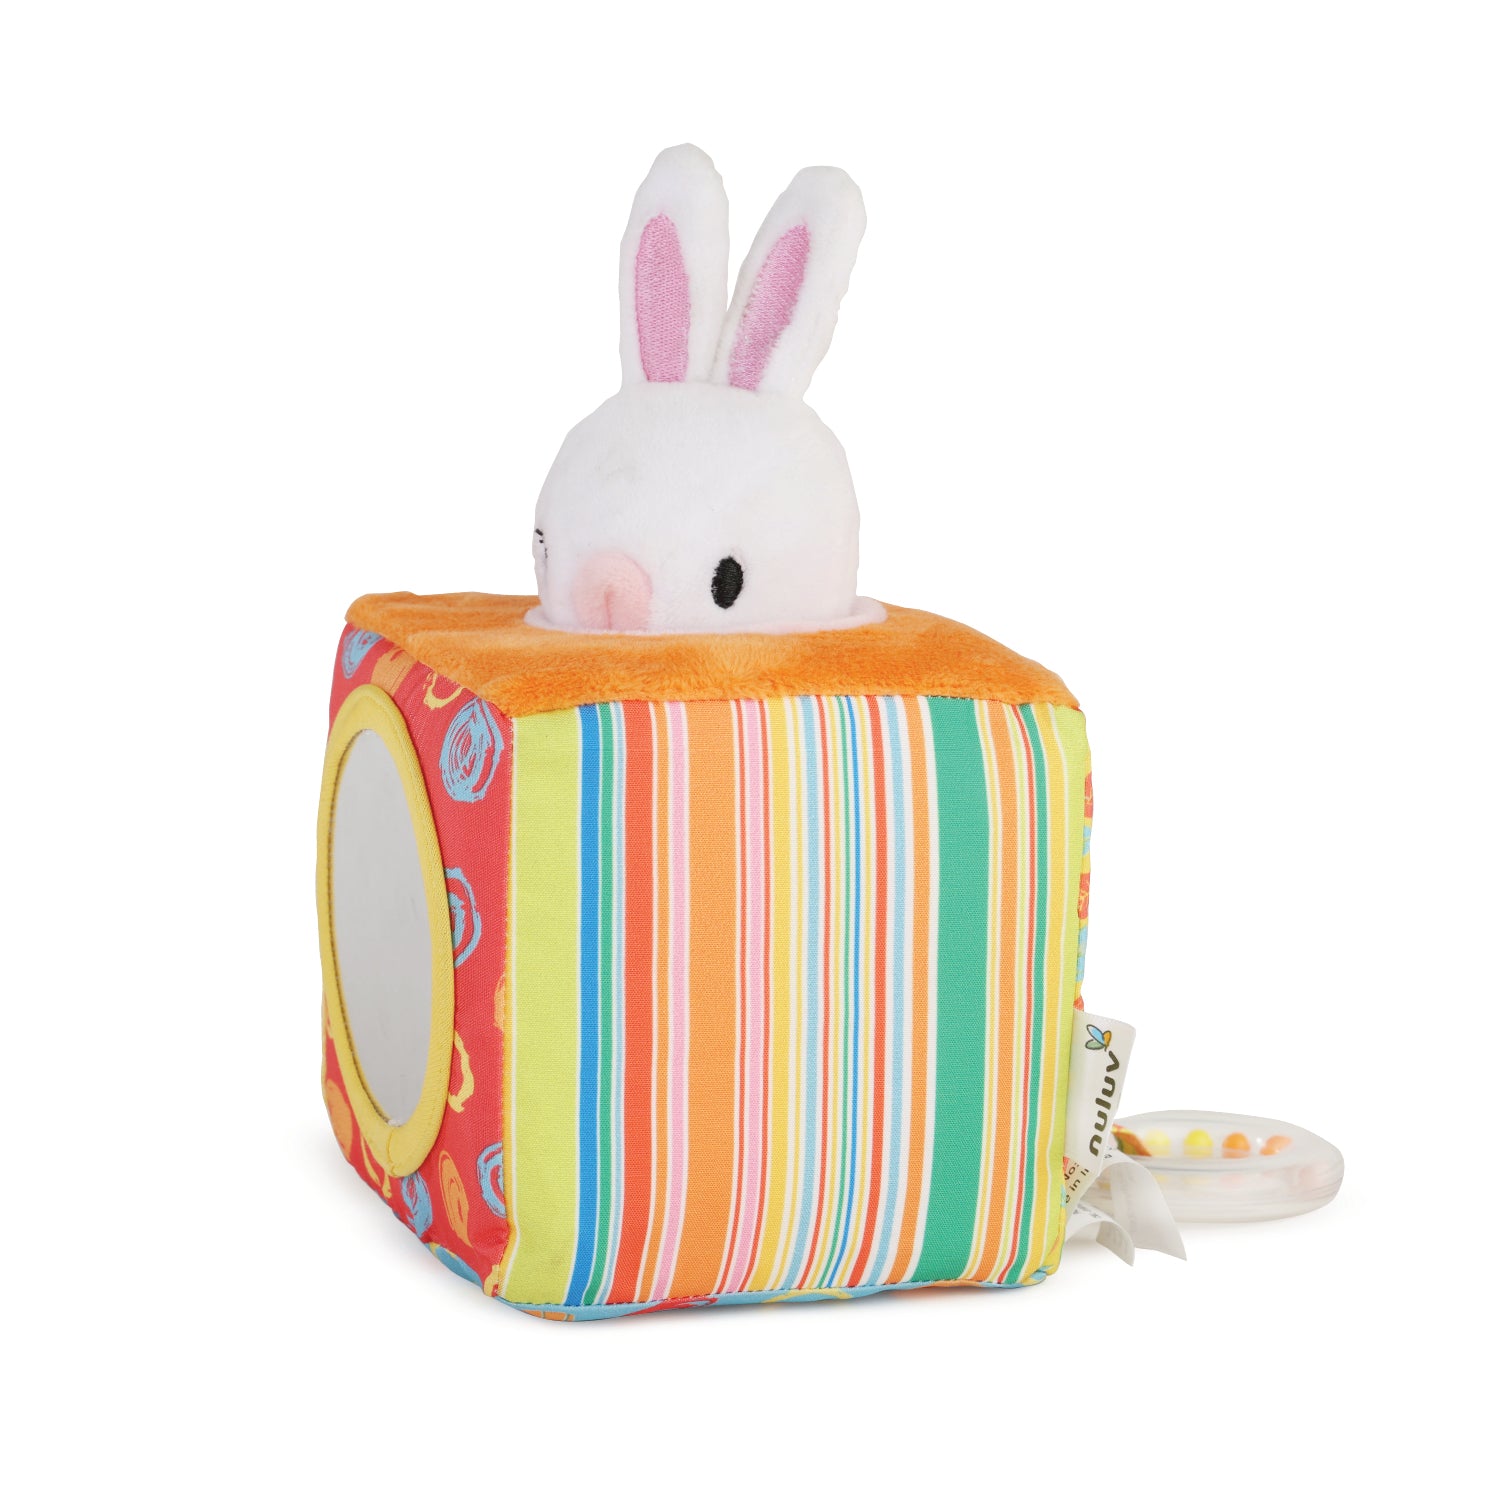 Nuluv Bunny Cube Activity Play Toy with Squeaky Crinkle Rattle For Baby 3 Months+